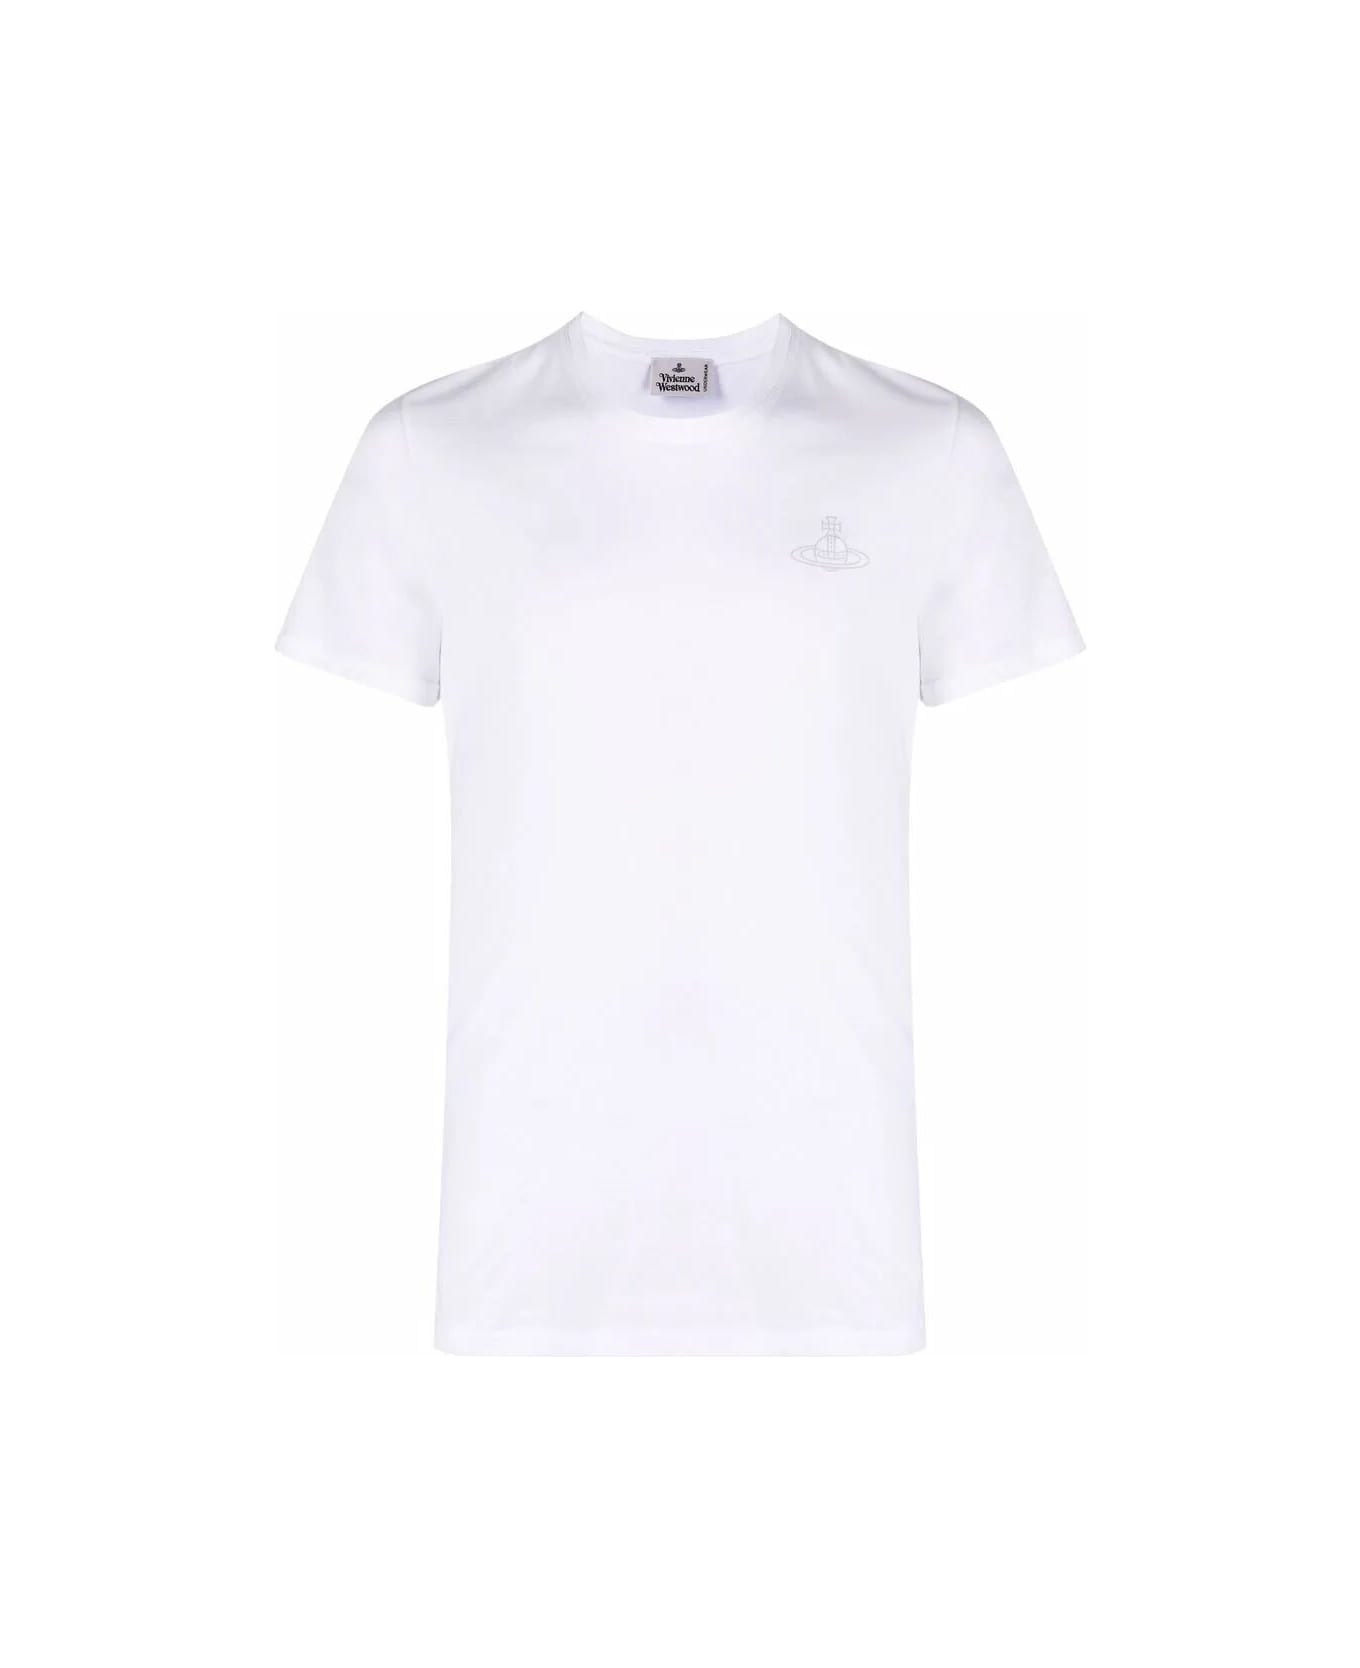 Vivienne Westwood Two Pack T-shirt - White